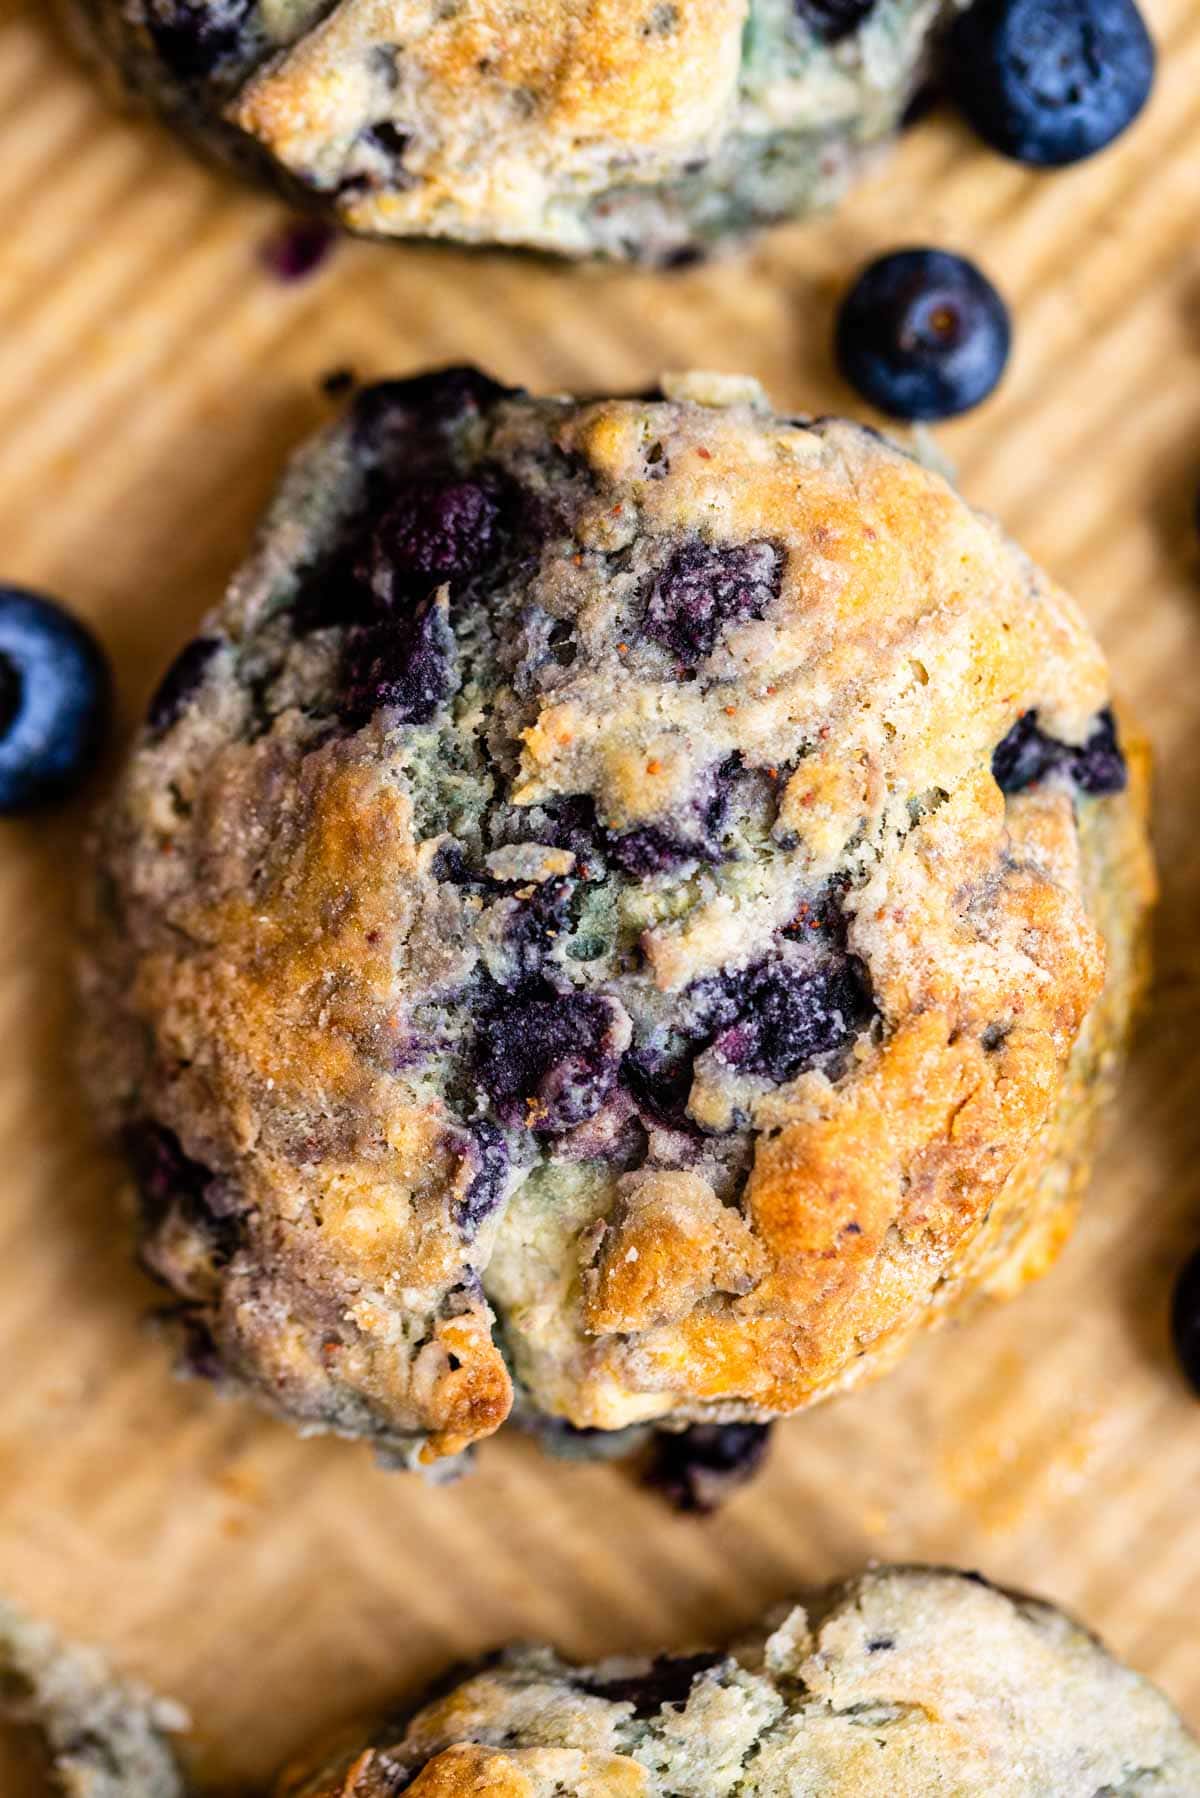 Overhead shot of blueberry biscuit on brown parchment.